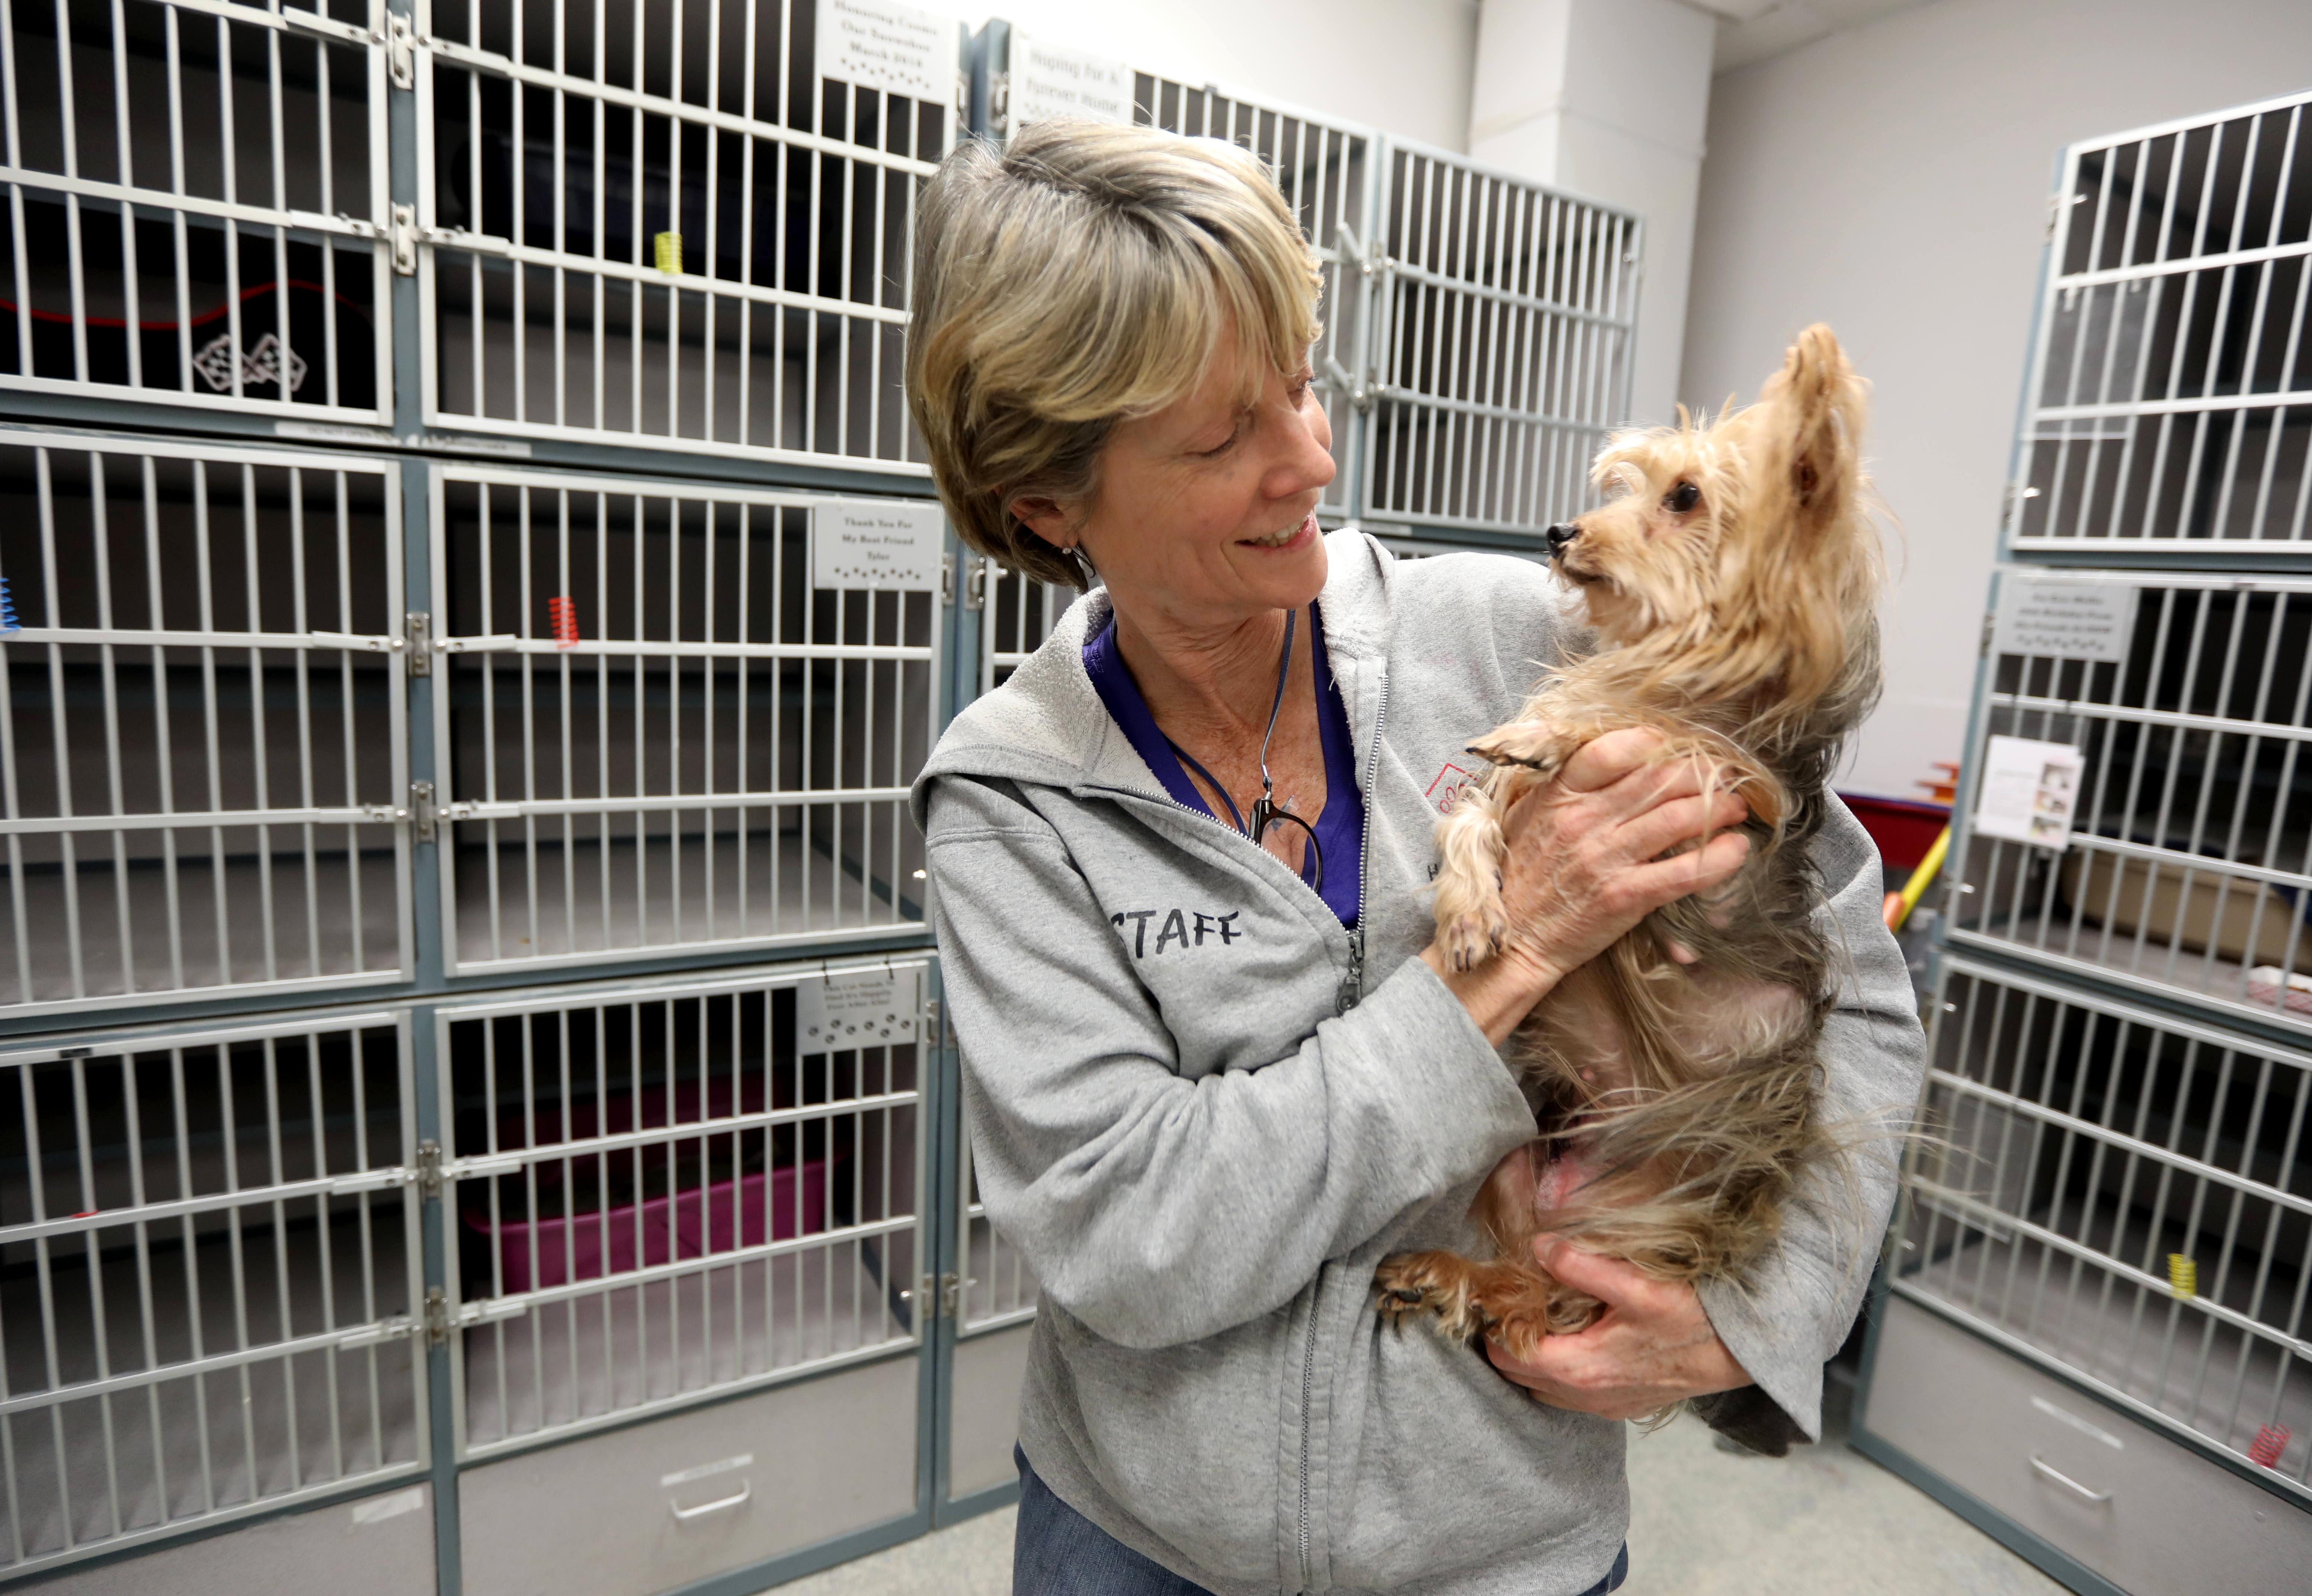 Coronavirus: Animal shelters empty cages, but still have pets to adopt